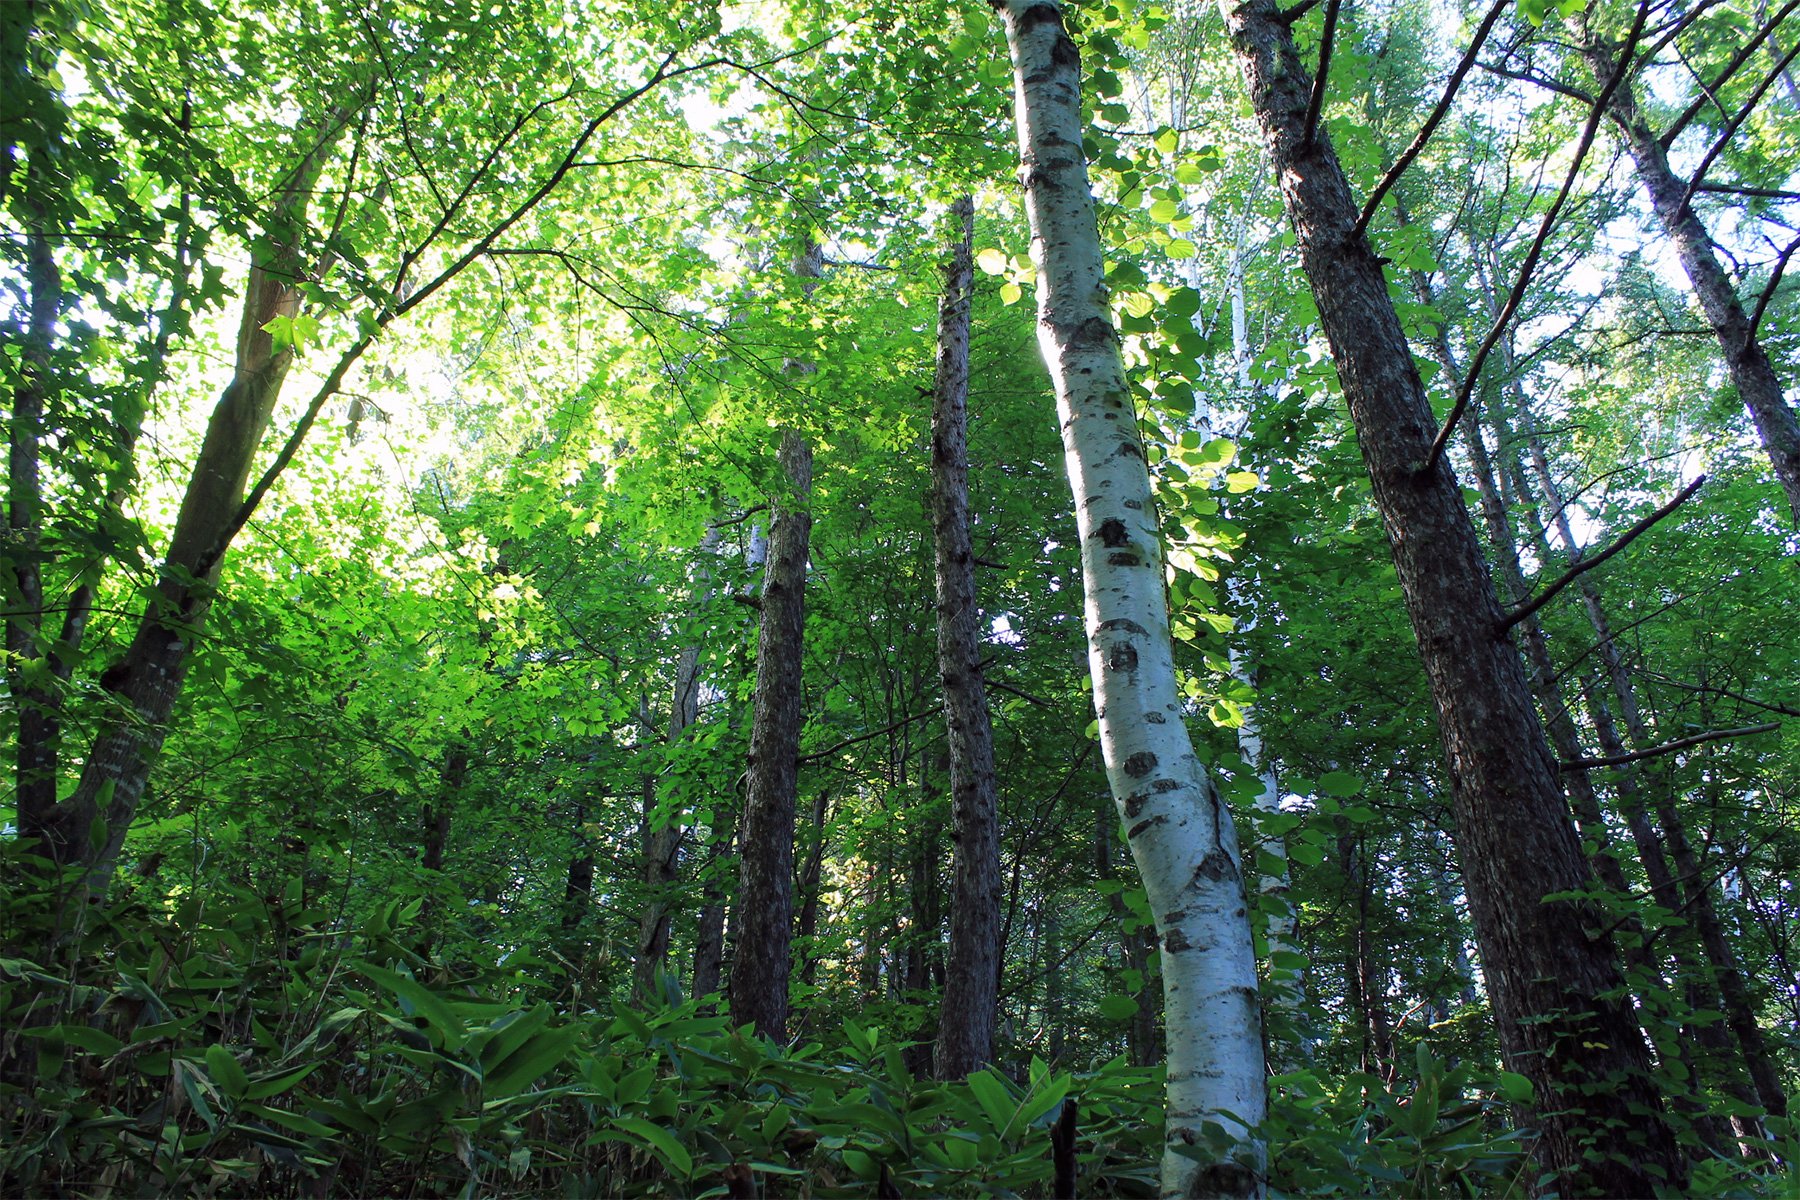 Teine Forest, one of the Materials' Forests (Sapporo, Hokkaido)